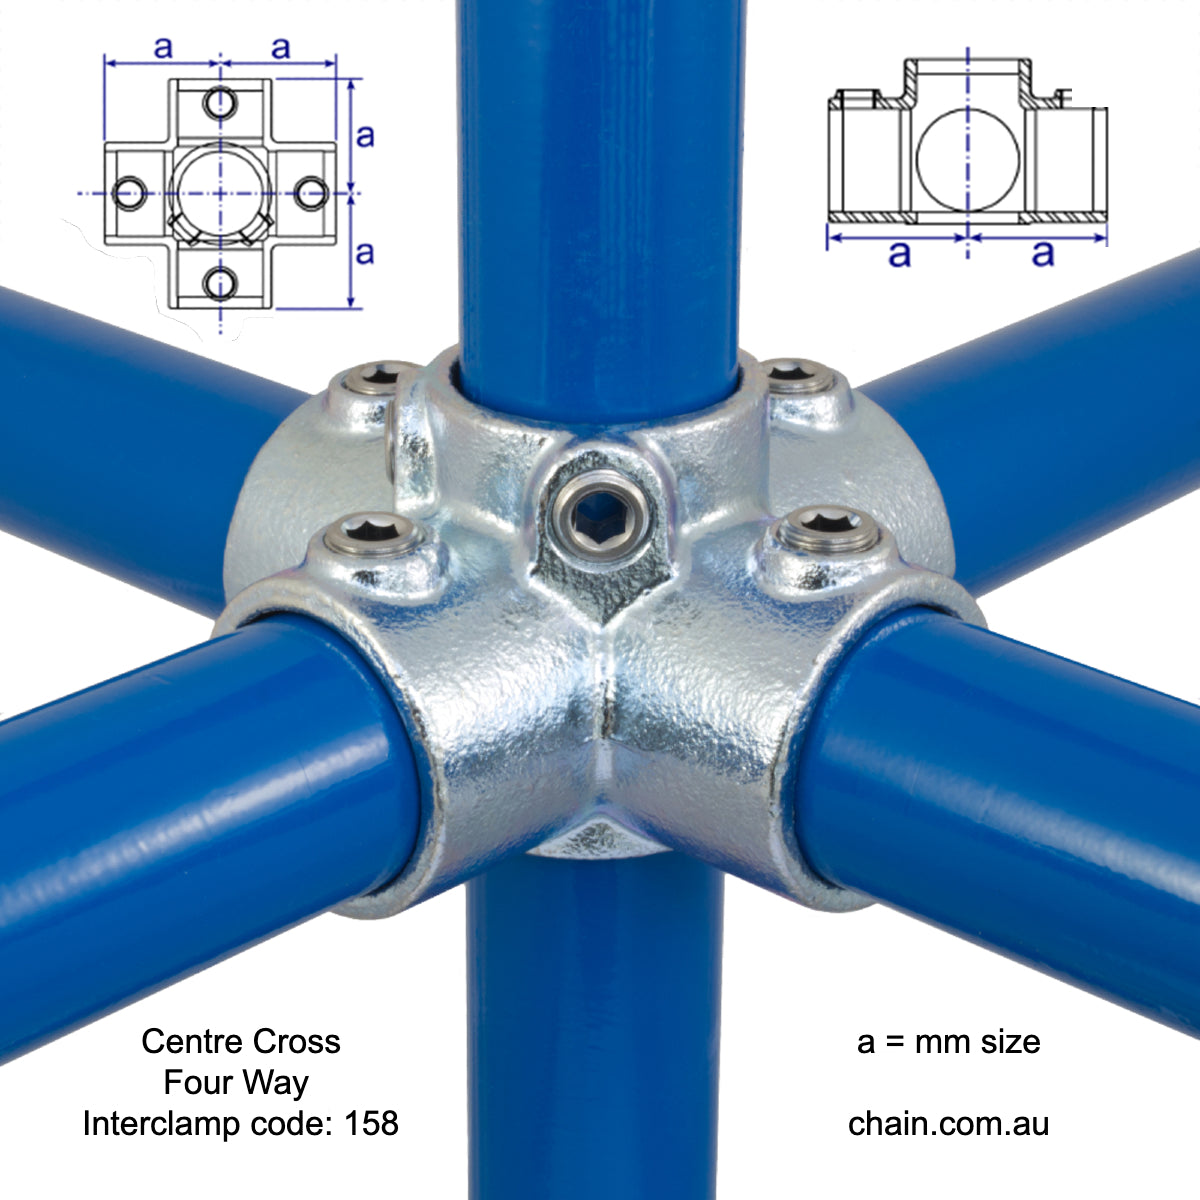 Four Way Centre Cross by Interclamp, Code 158. Shop rail, pipe and fence fittings online chain.com.au. Australia wide shipping.